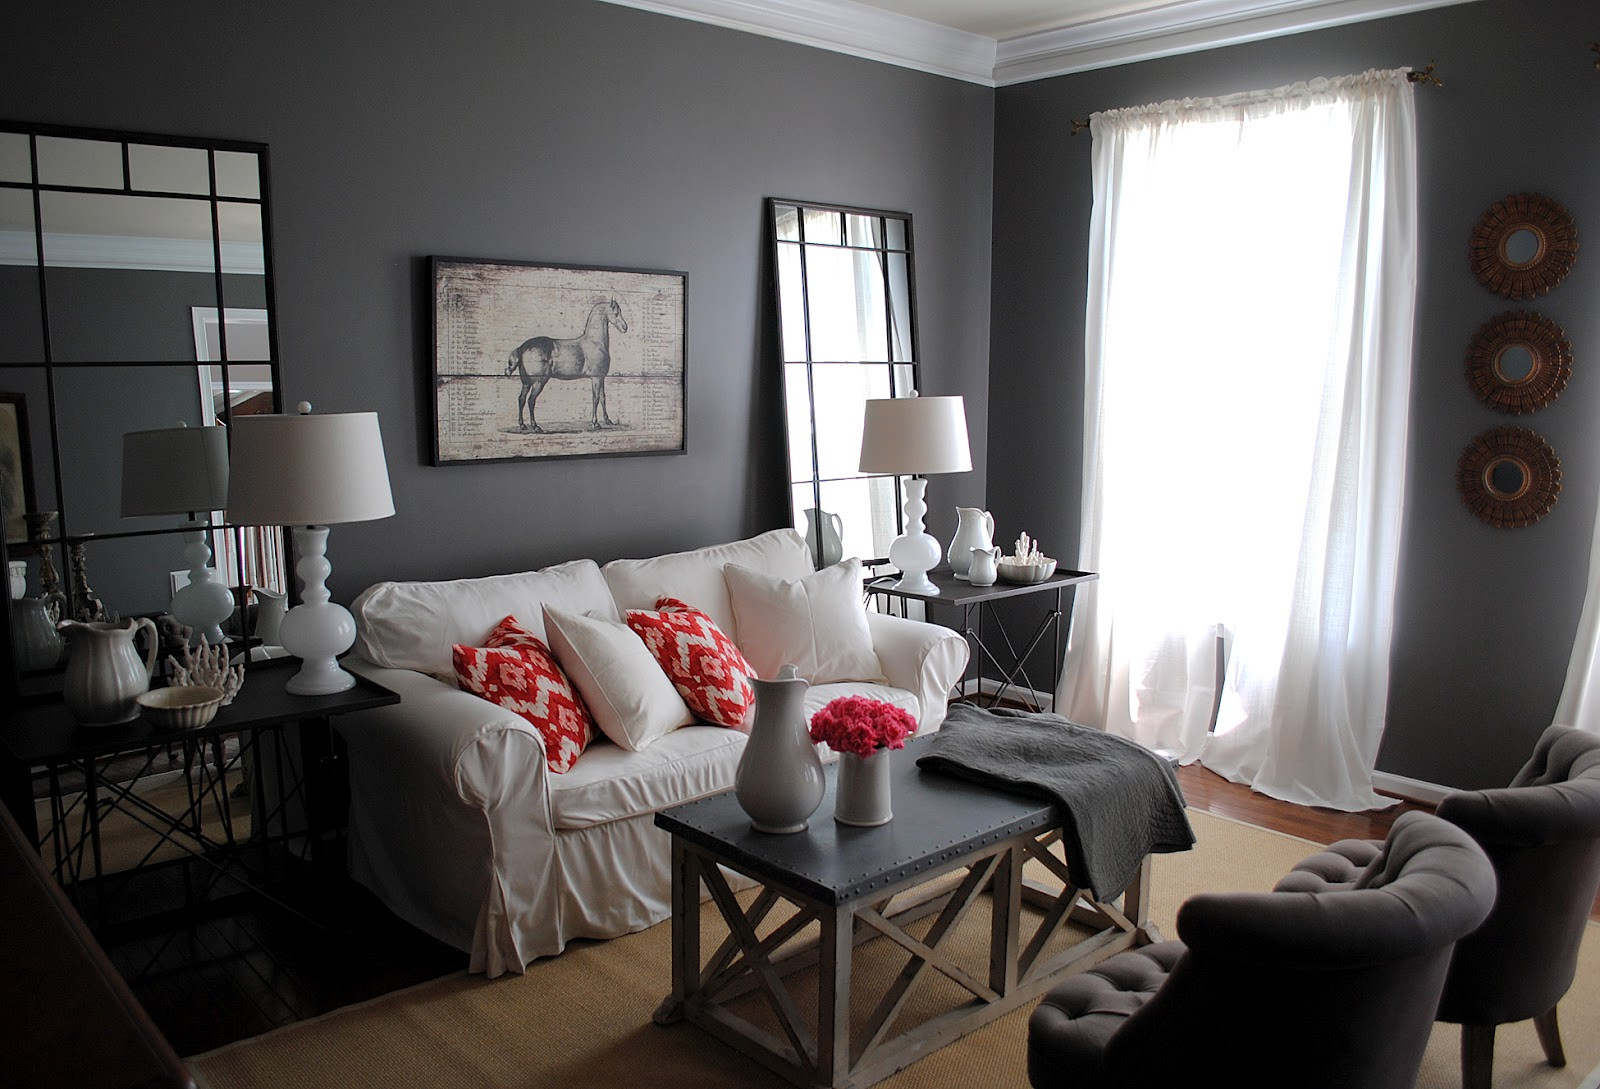 Grey Living Room Walls
 My Living Room The Big Reveal & Huge Giveaway The